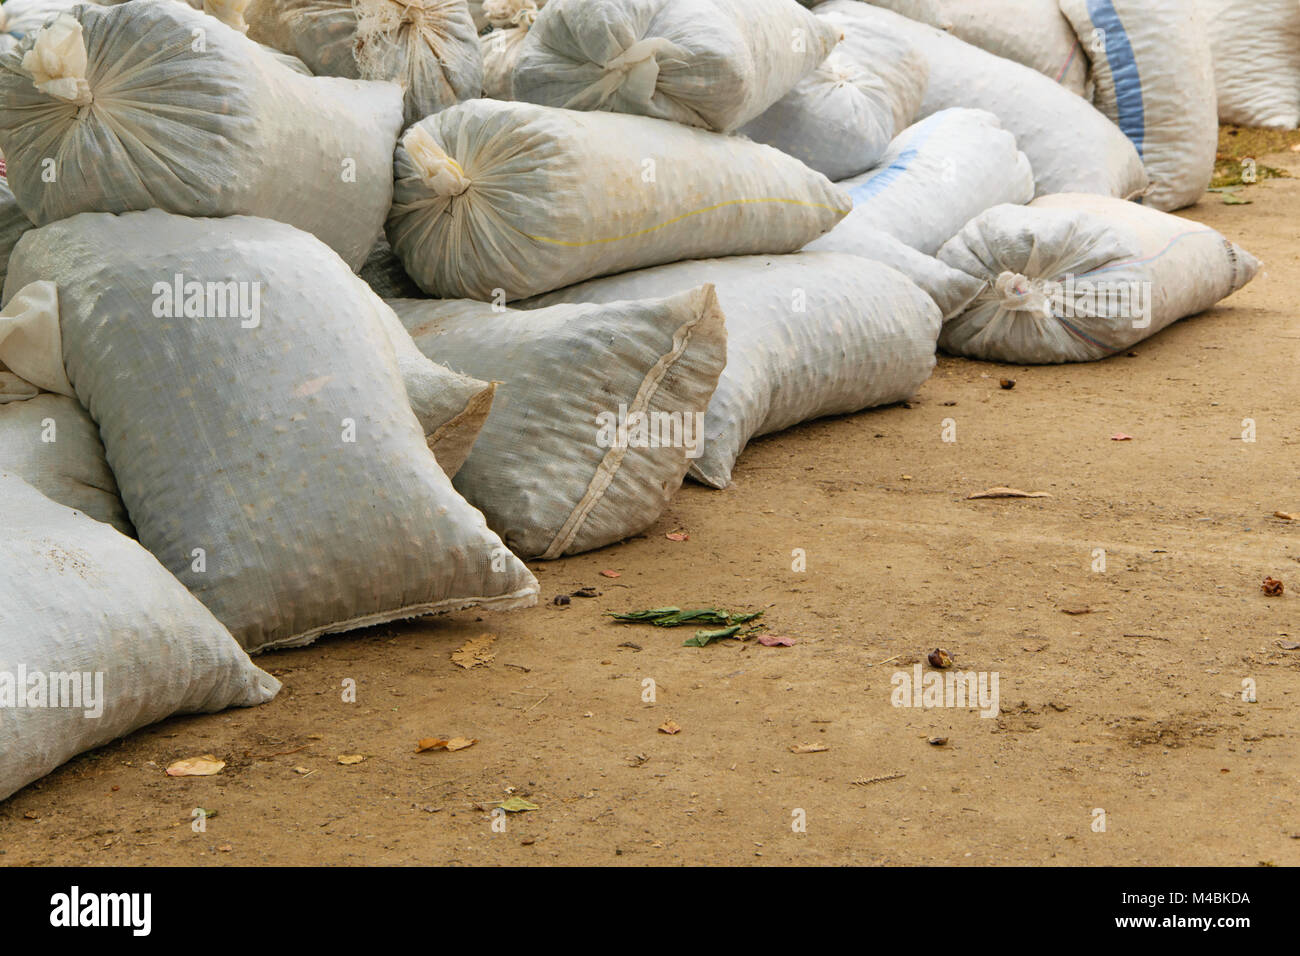 Hemp sacks full of harvest products accumulated on the ground. Agriculture, business concept Stock Photo